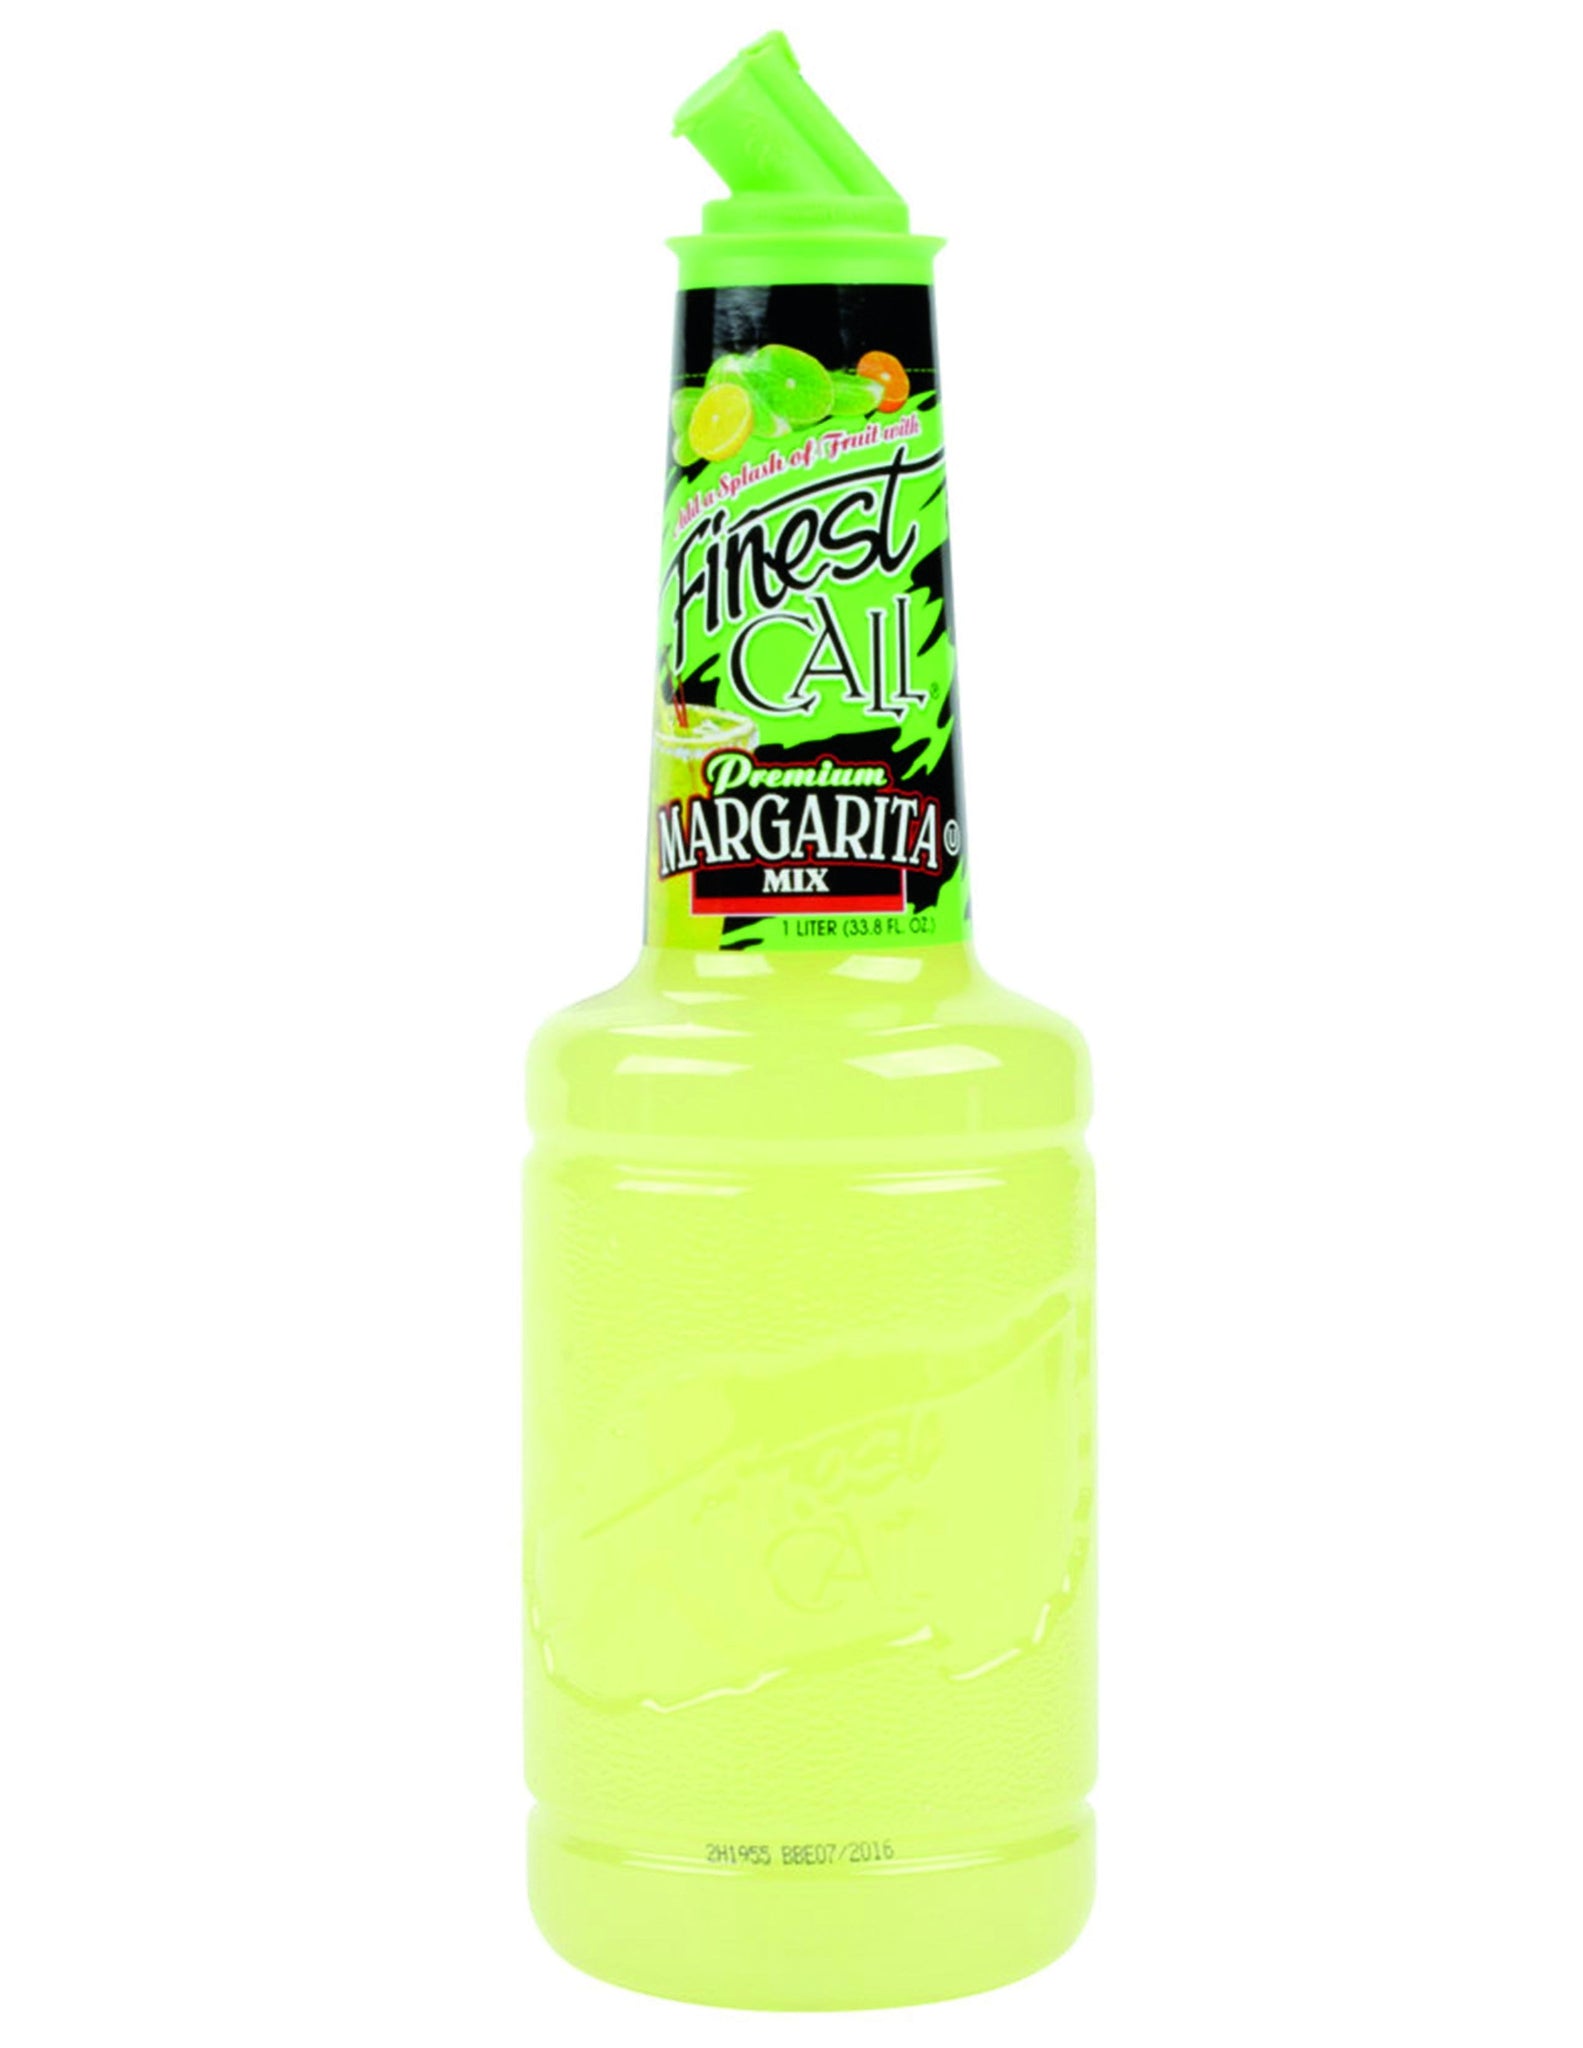 aba>Finest Call Margarita Mix, 1 liter (brand may vary depending on availability may be substituted)